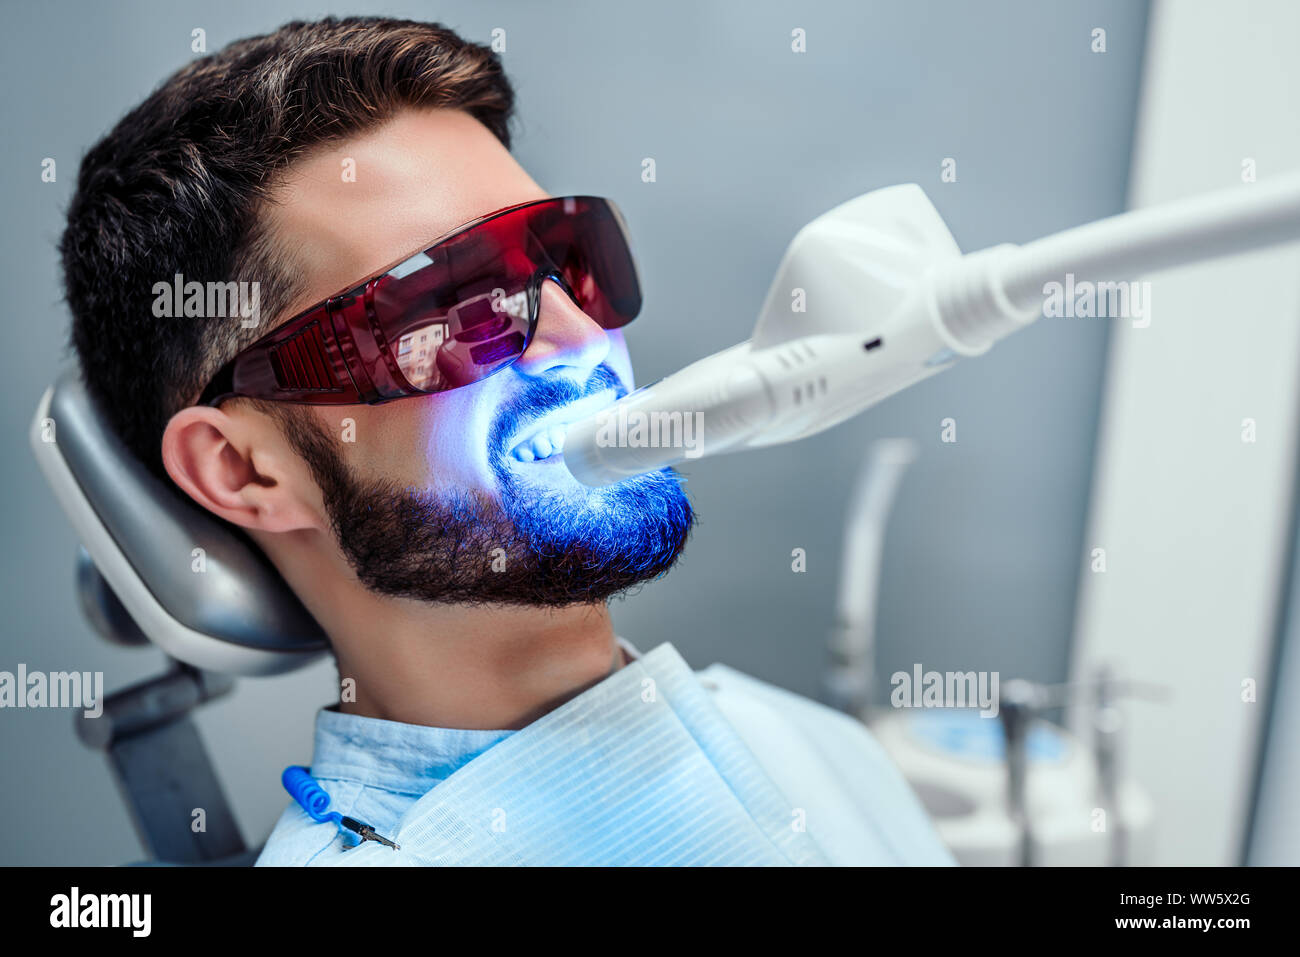 Close up view of man undergoing laser tooth whitening treatment to remove stains and discoloration. Stock Photo